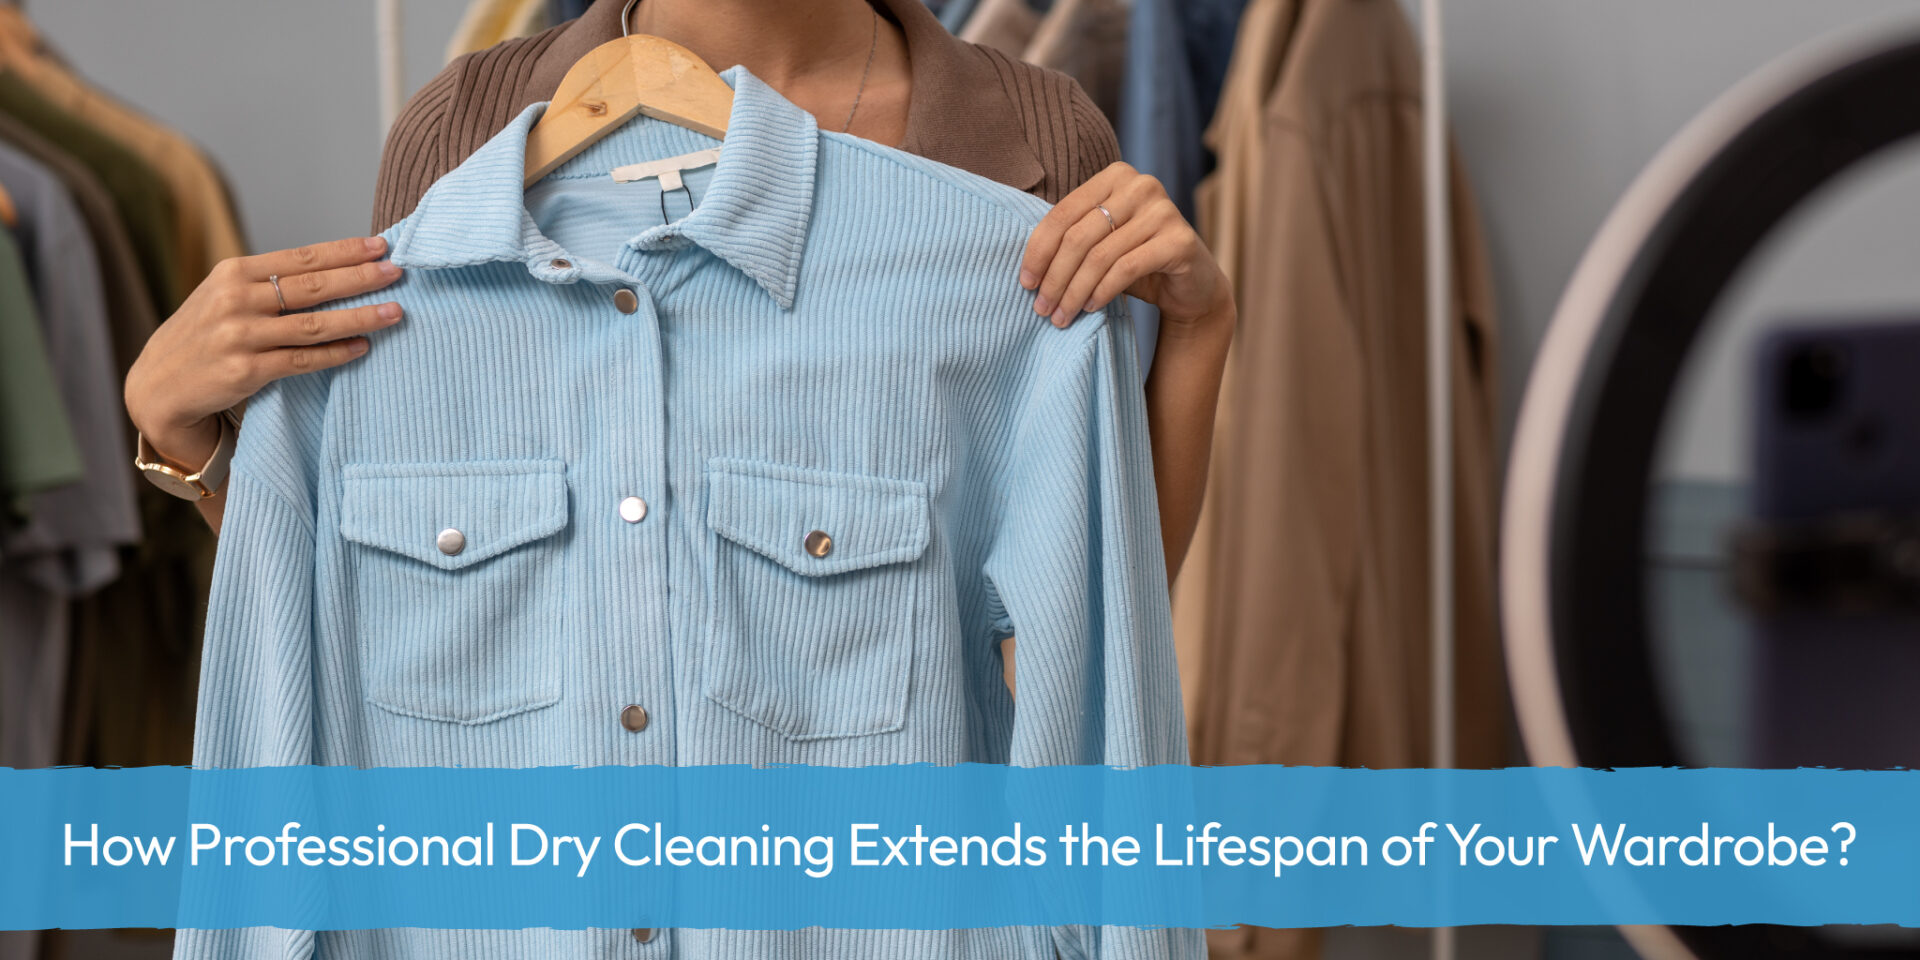 How Professional Dry Cleaning Extends the Lifespan of Your Wardrobe?